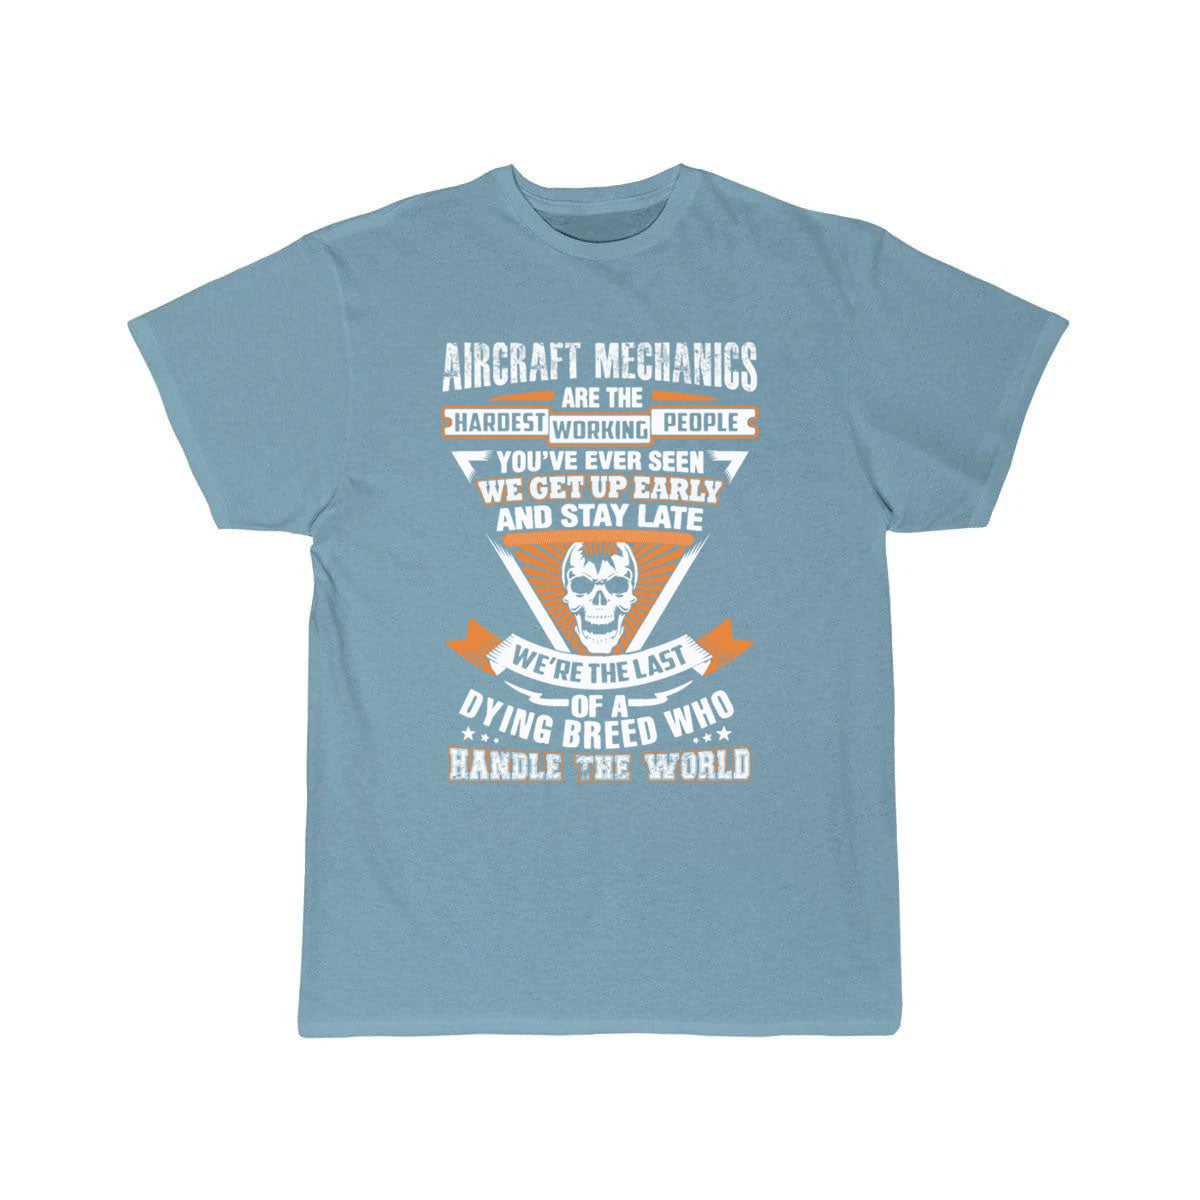 Aircraft mechanics - The last of a dying breed  T SHIRT THE AV8R